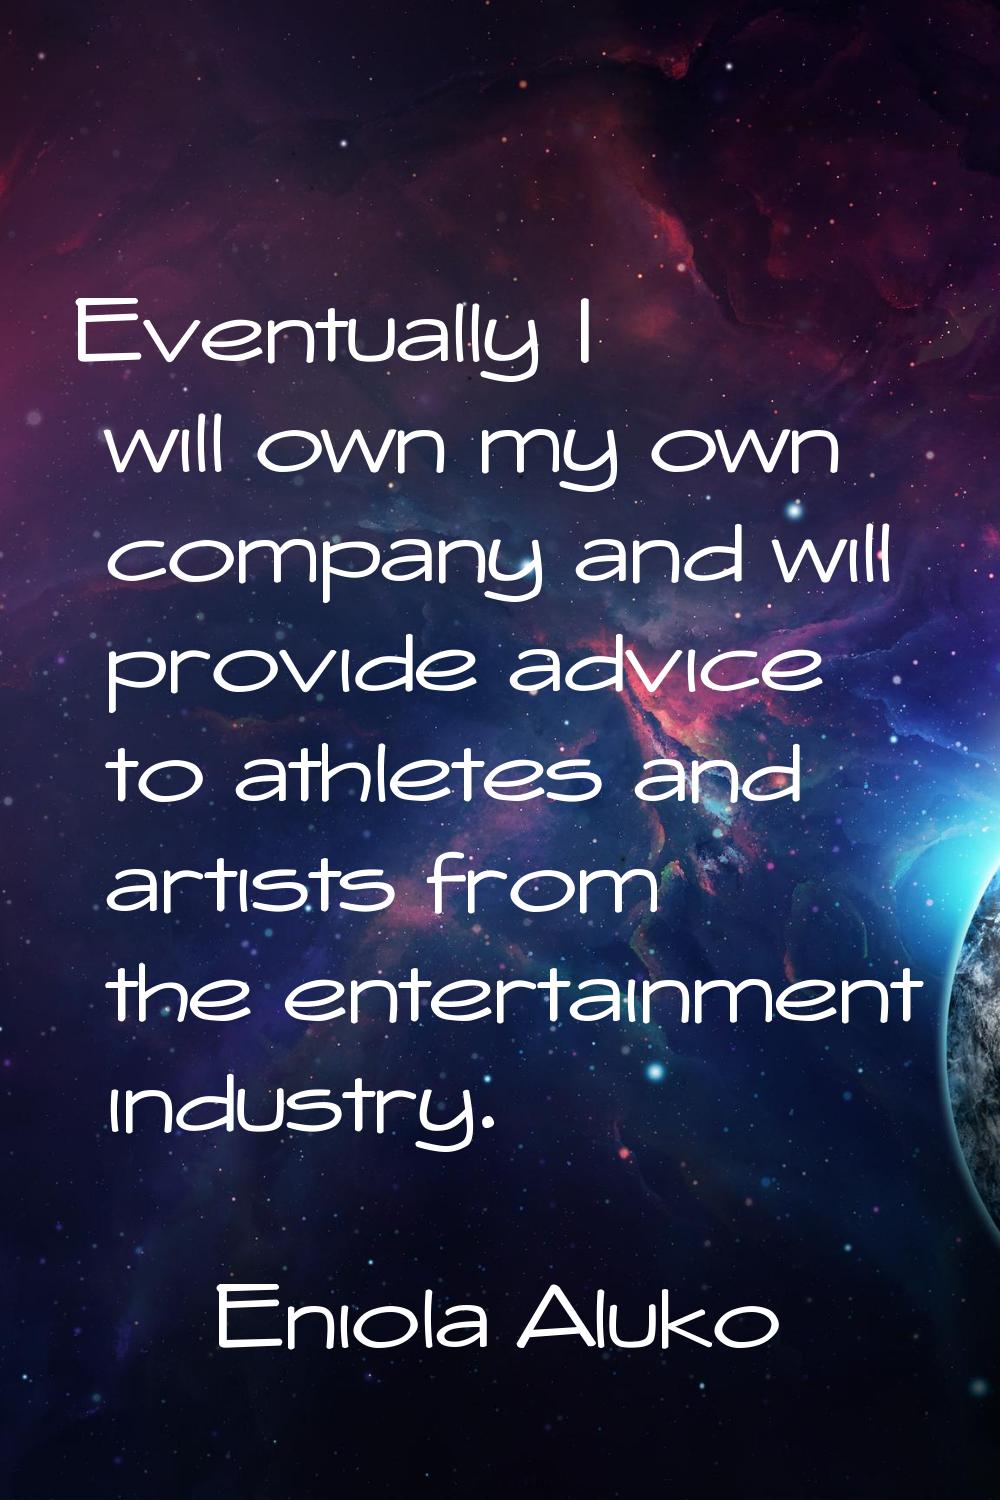 Eventually I will own my own company and will provide advice to athletes and artists from the enter